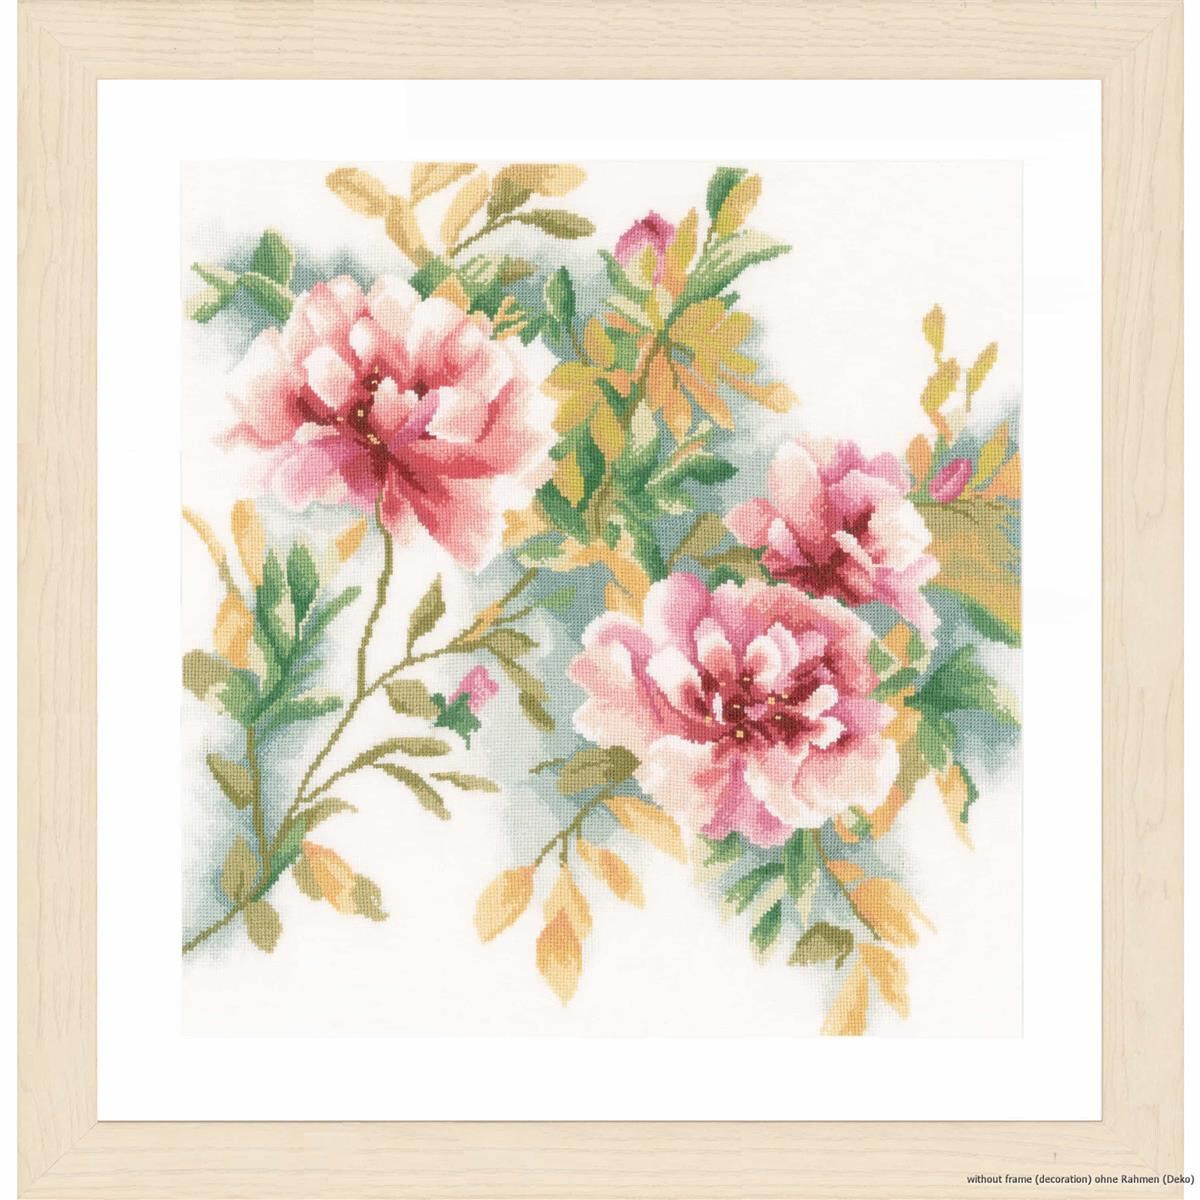 A framed floral embroidery artwork featuring three large...